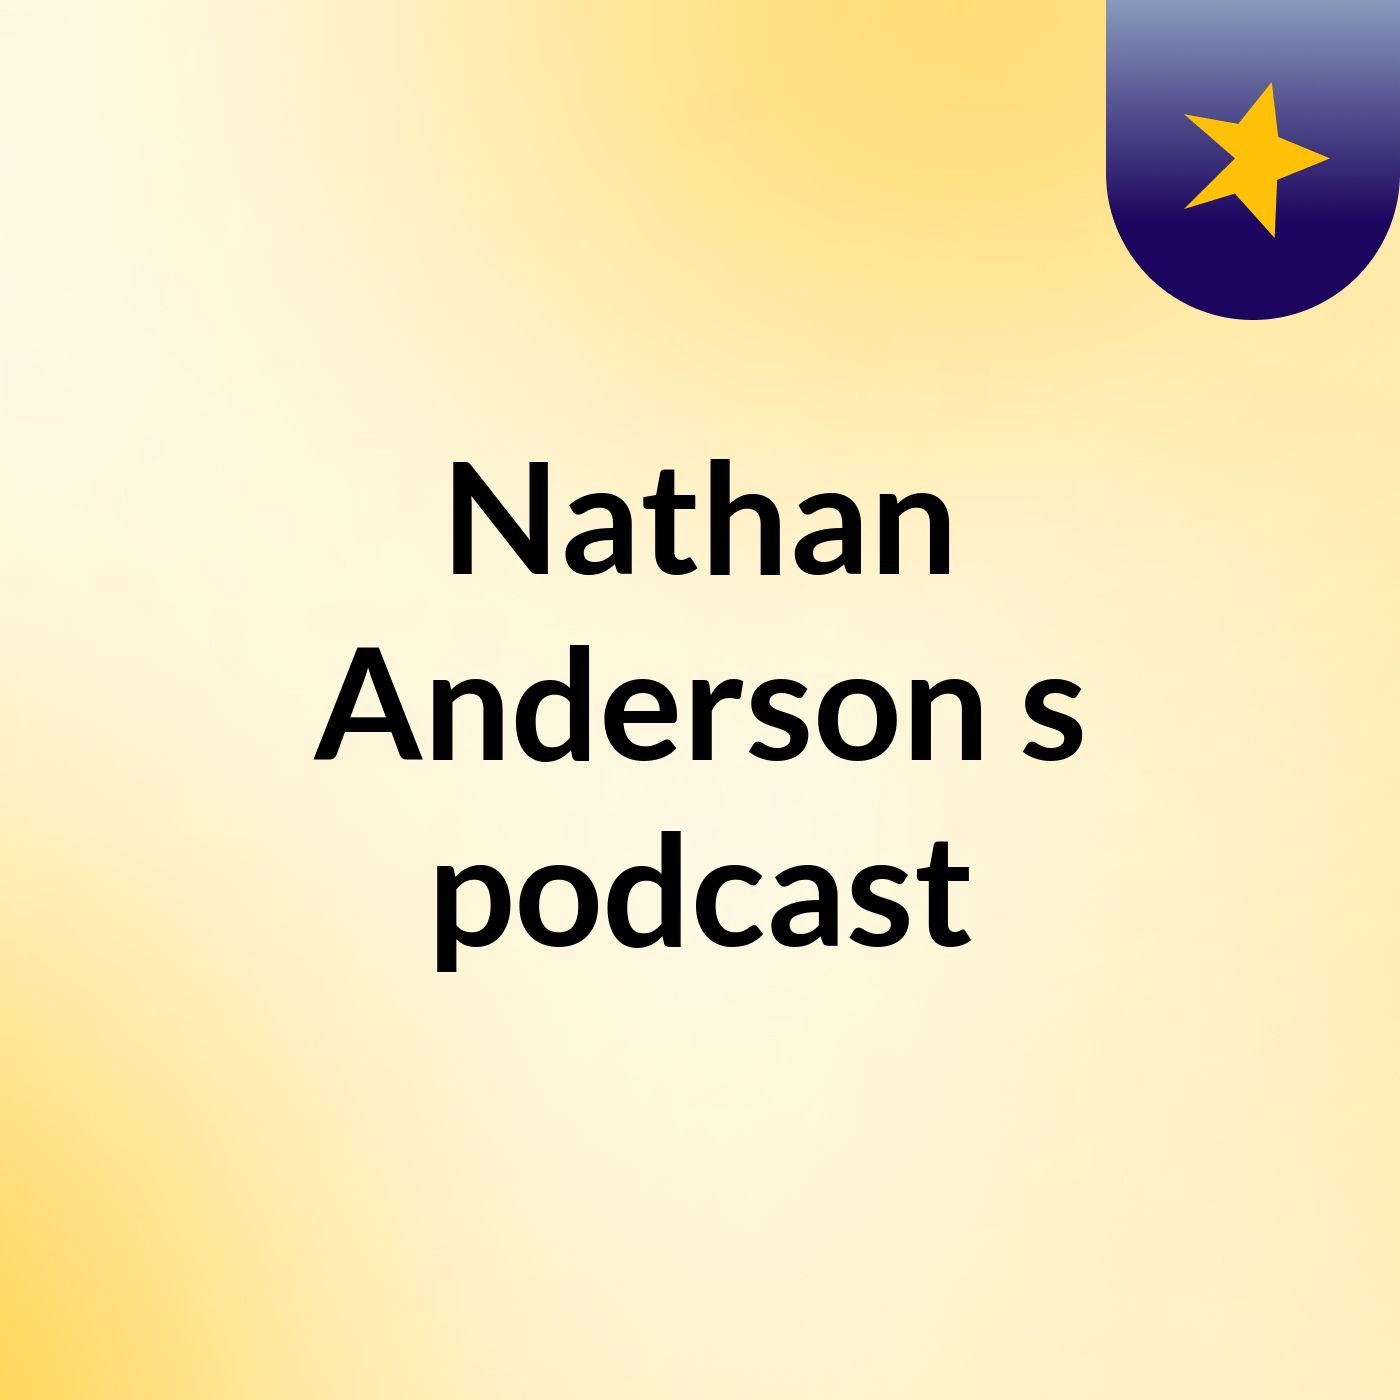 Nathan Anderson's podcast